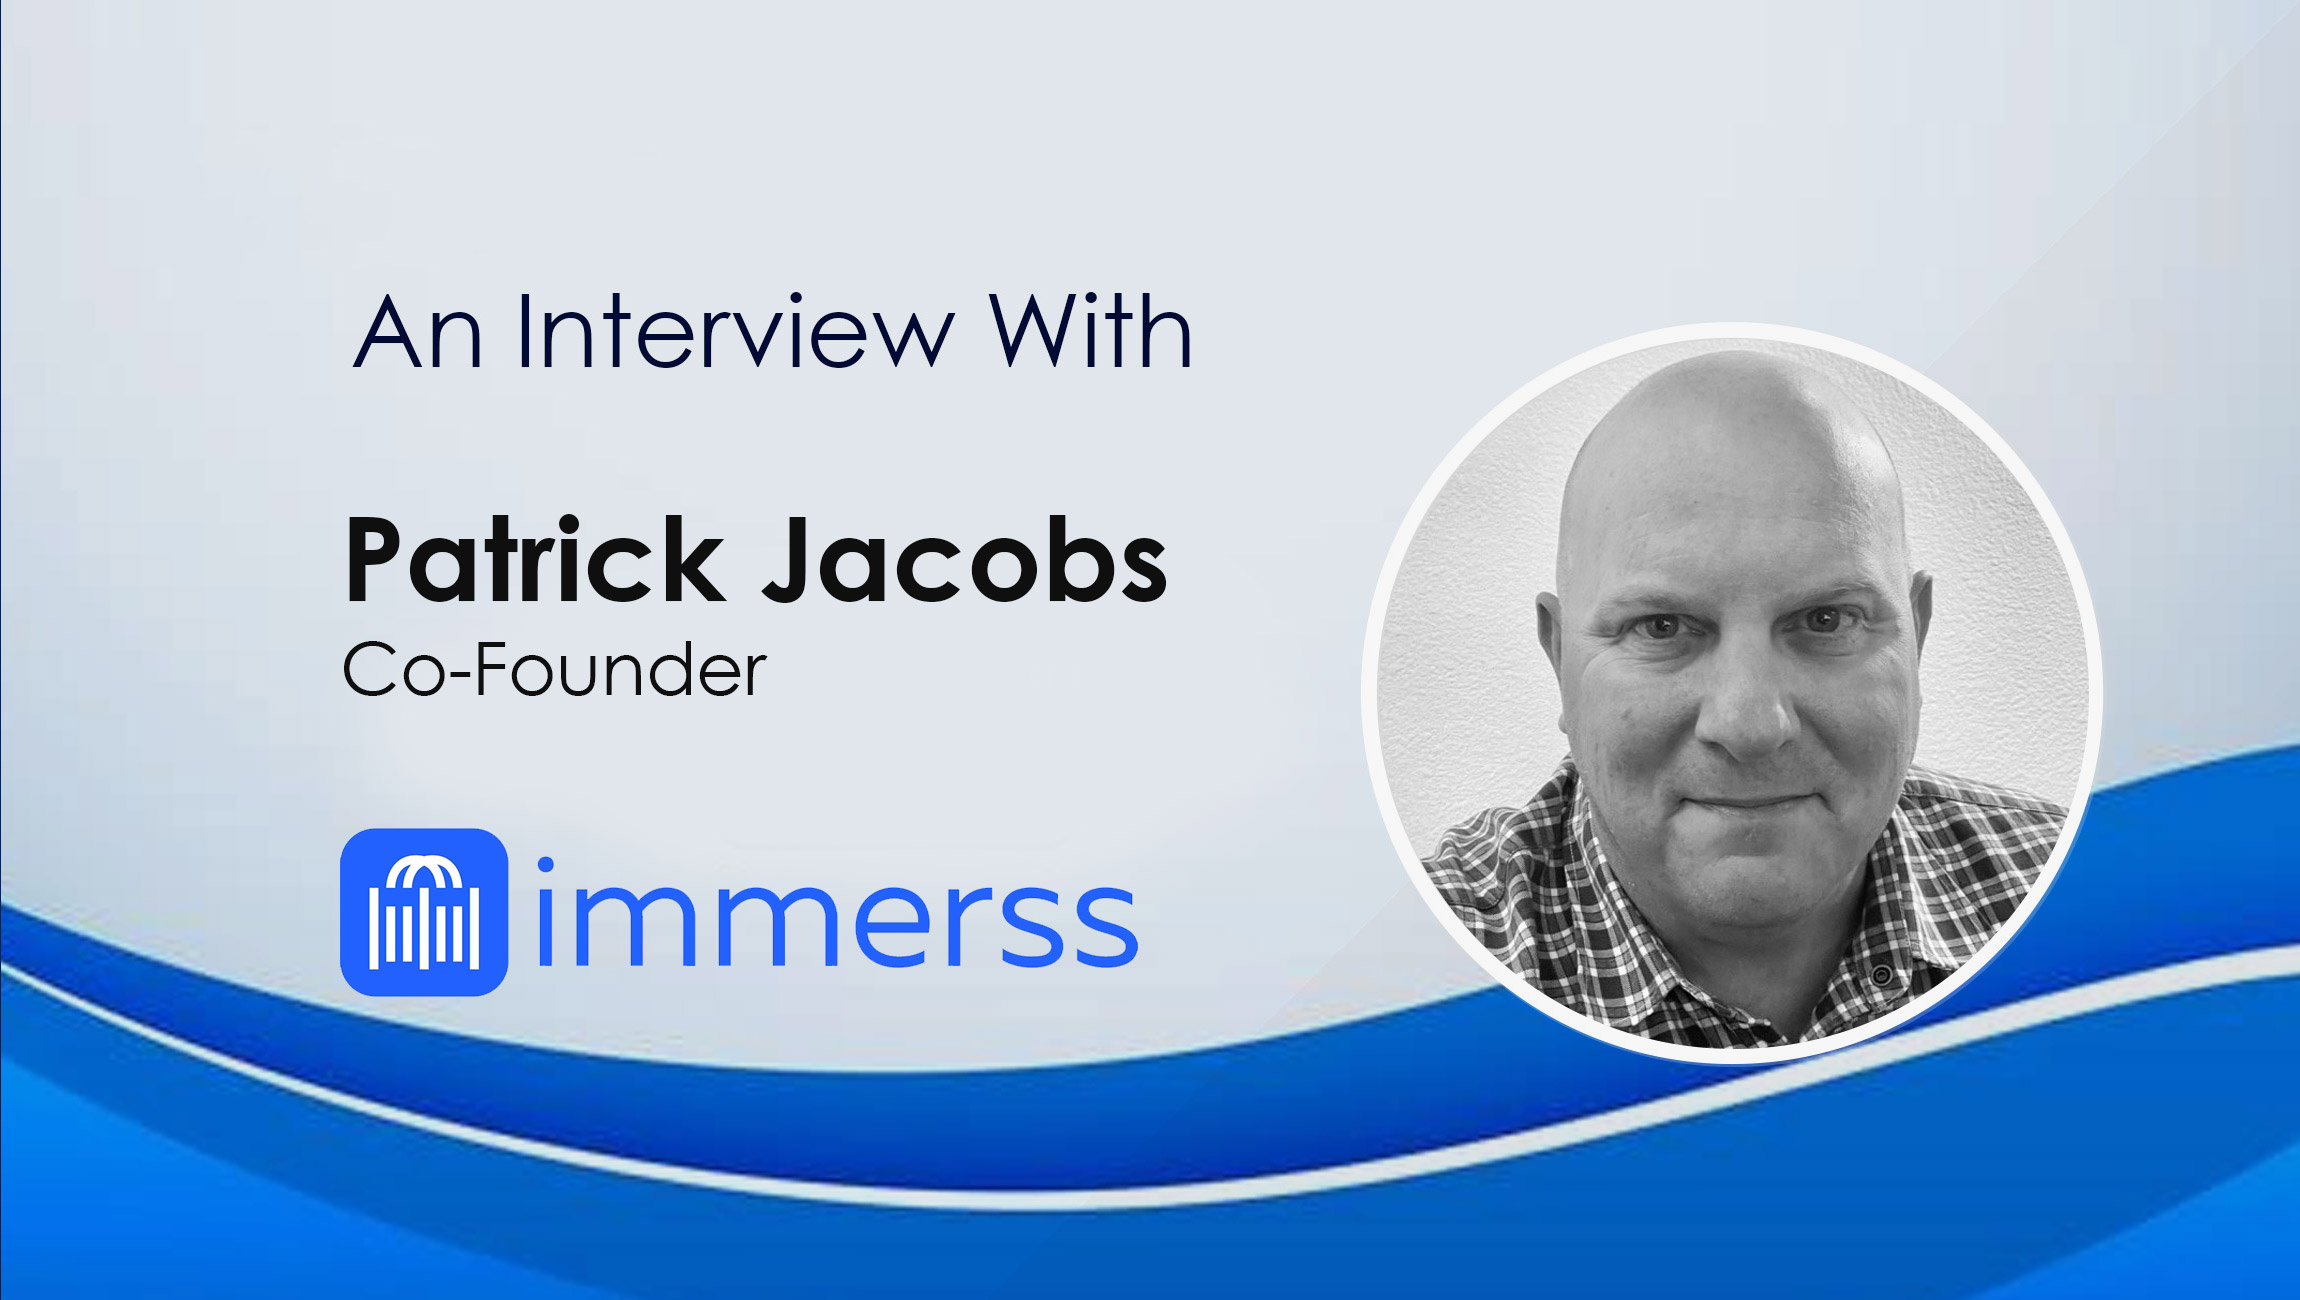 SalesTechStar Interview with Patrick Jacobs, Co-founder at Immerss